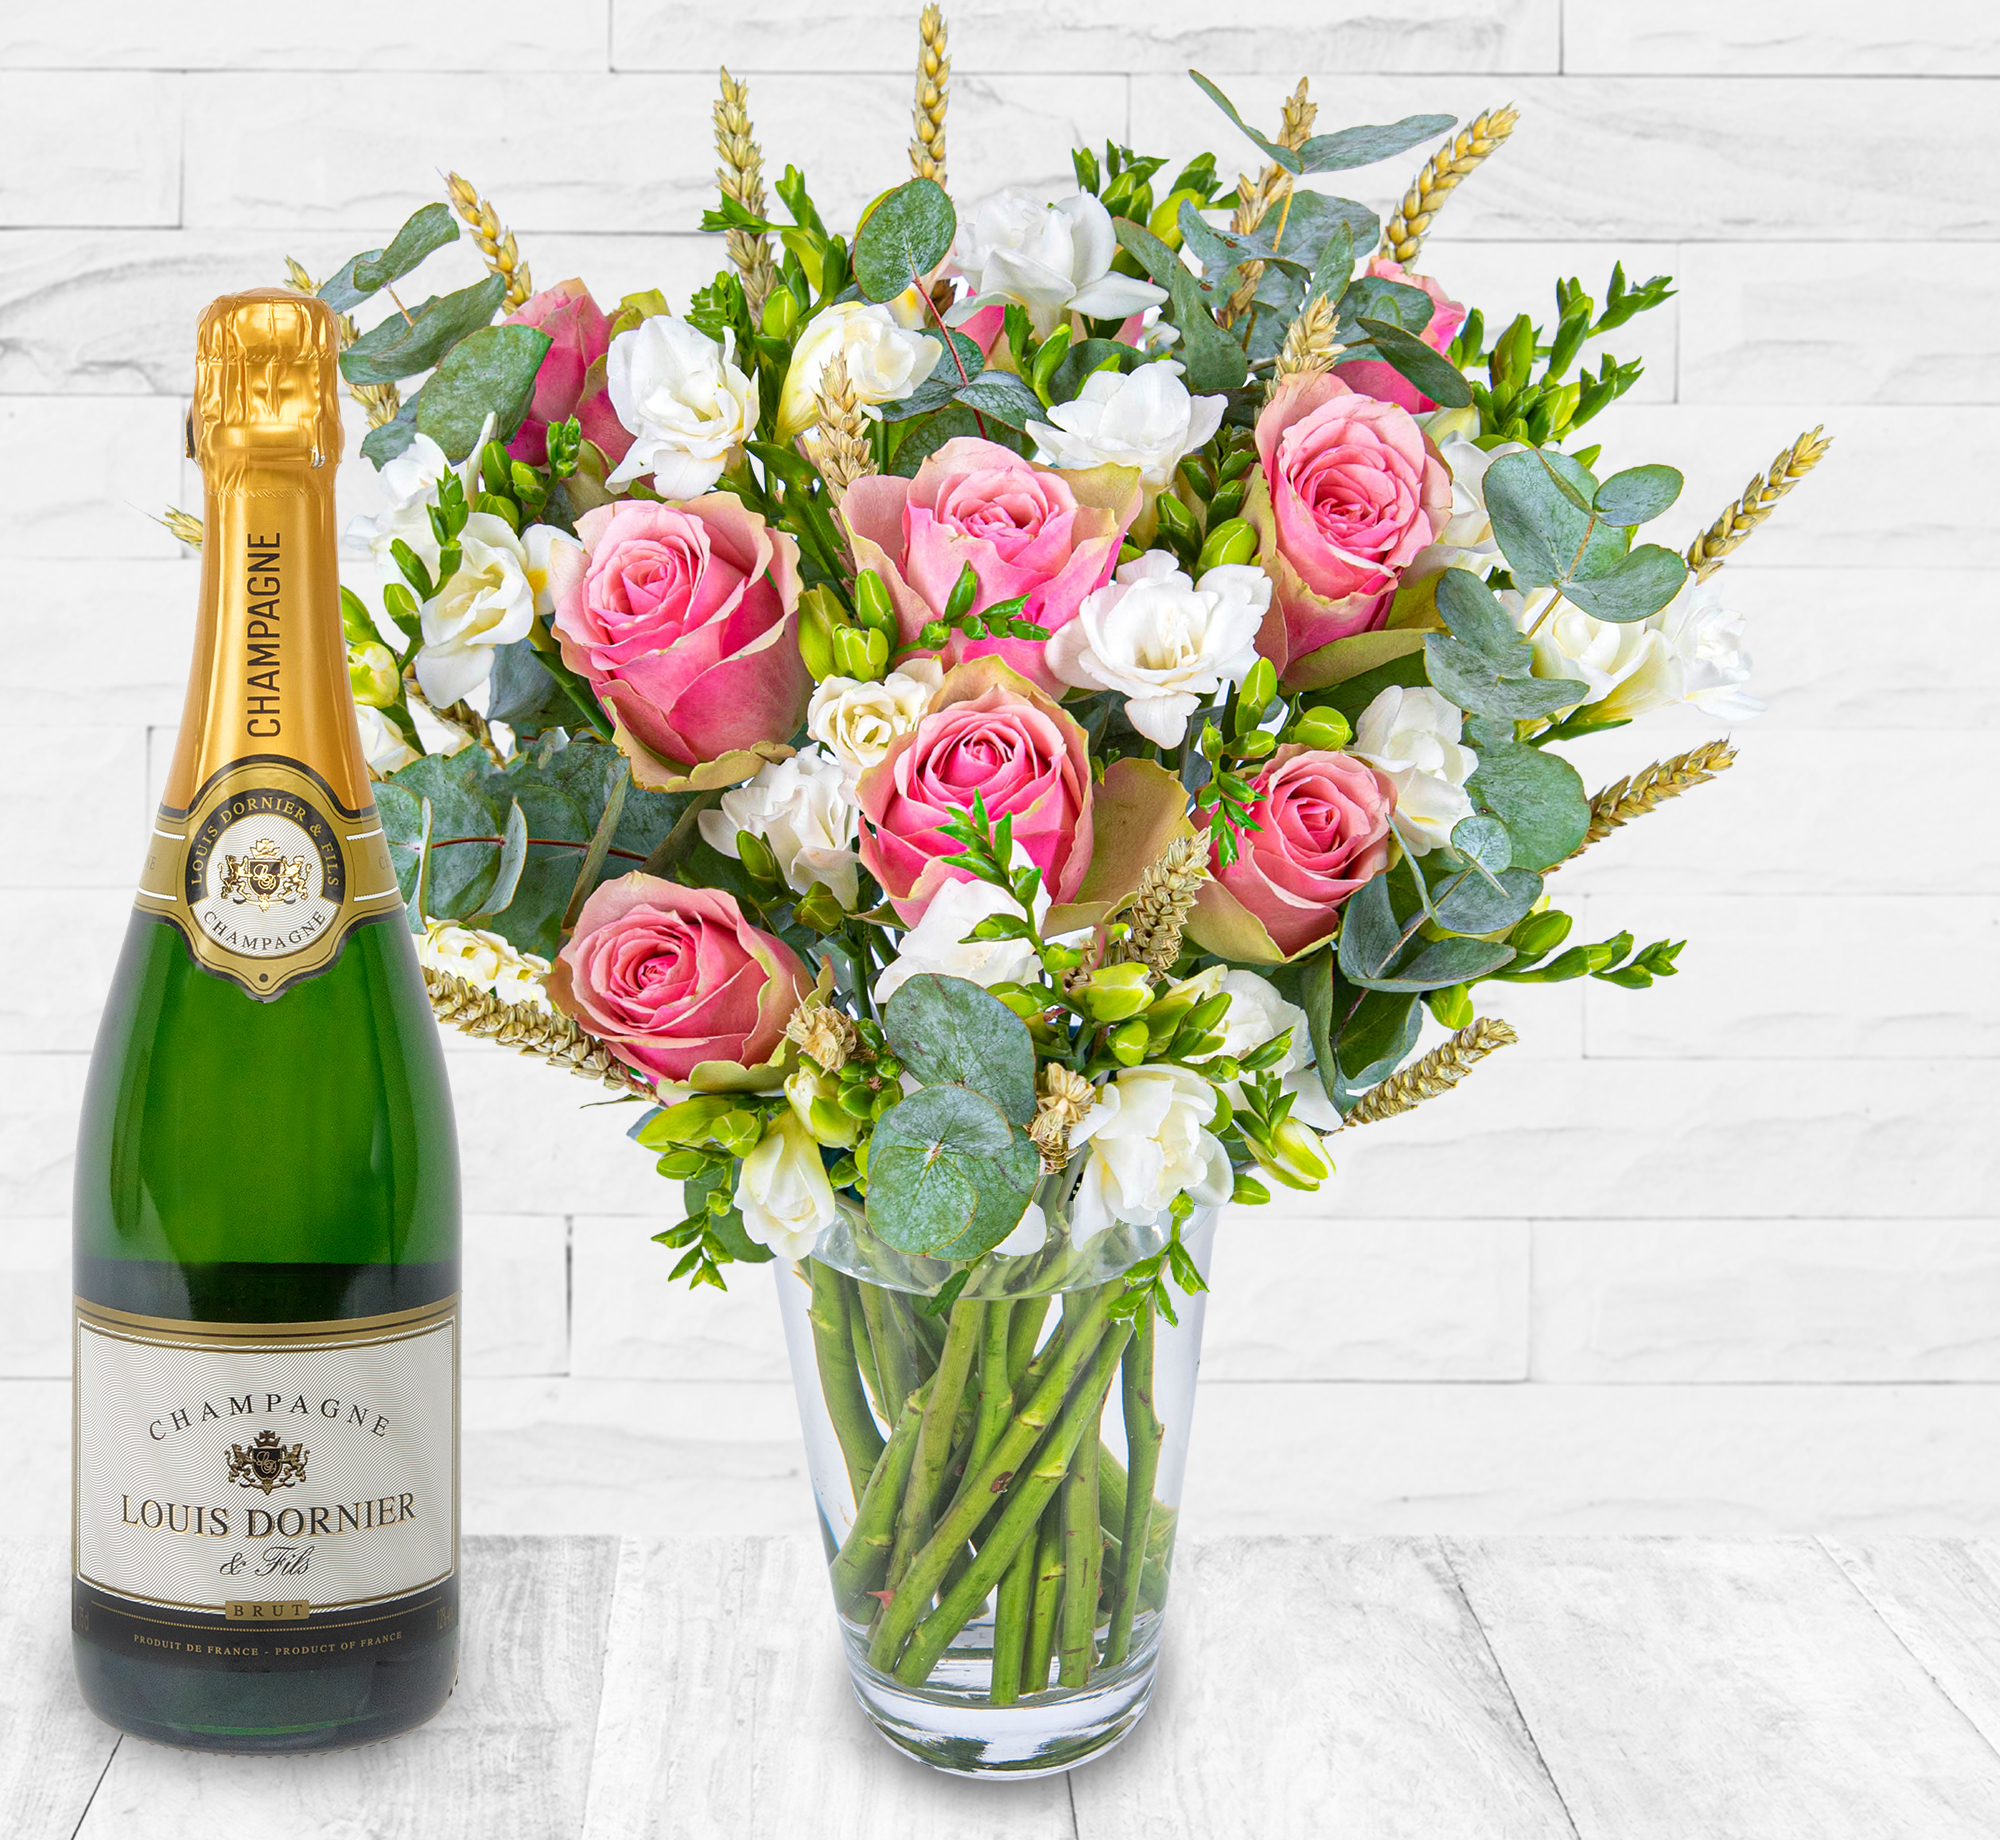 Wild Meadows Champagne Gift